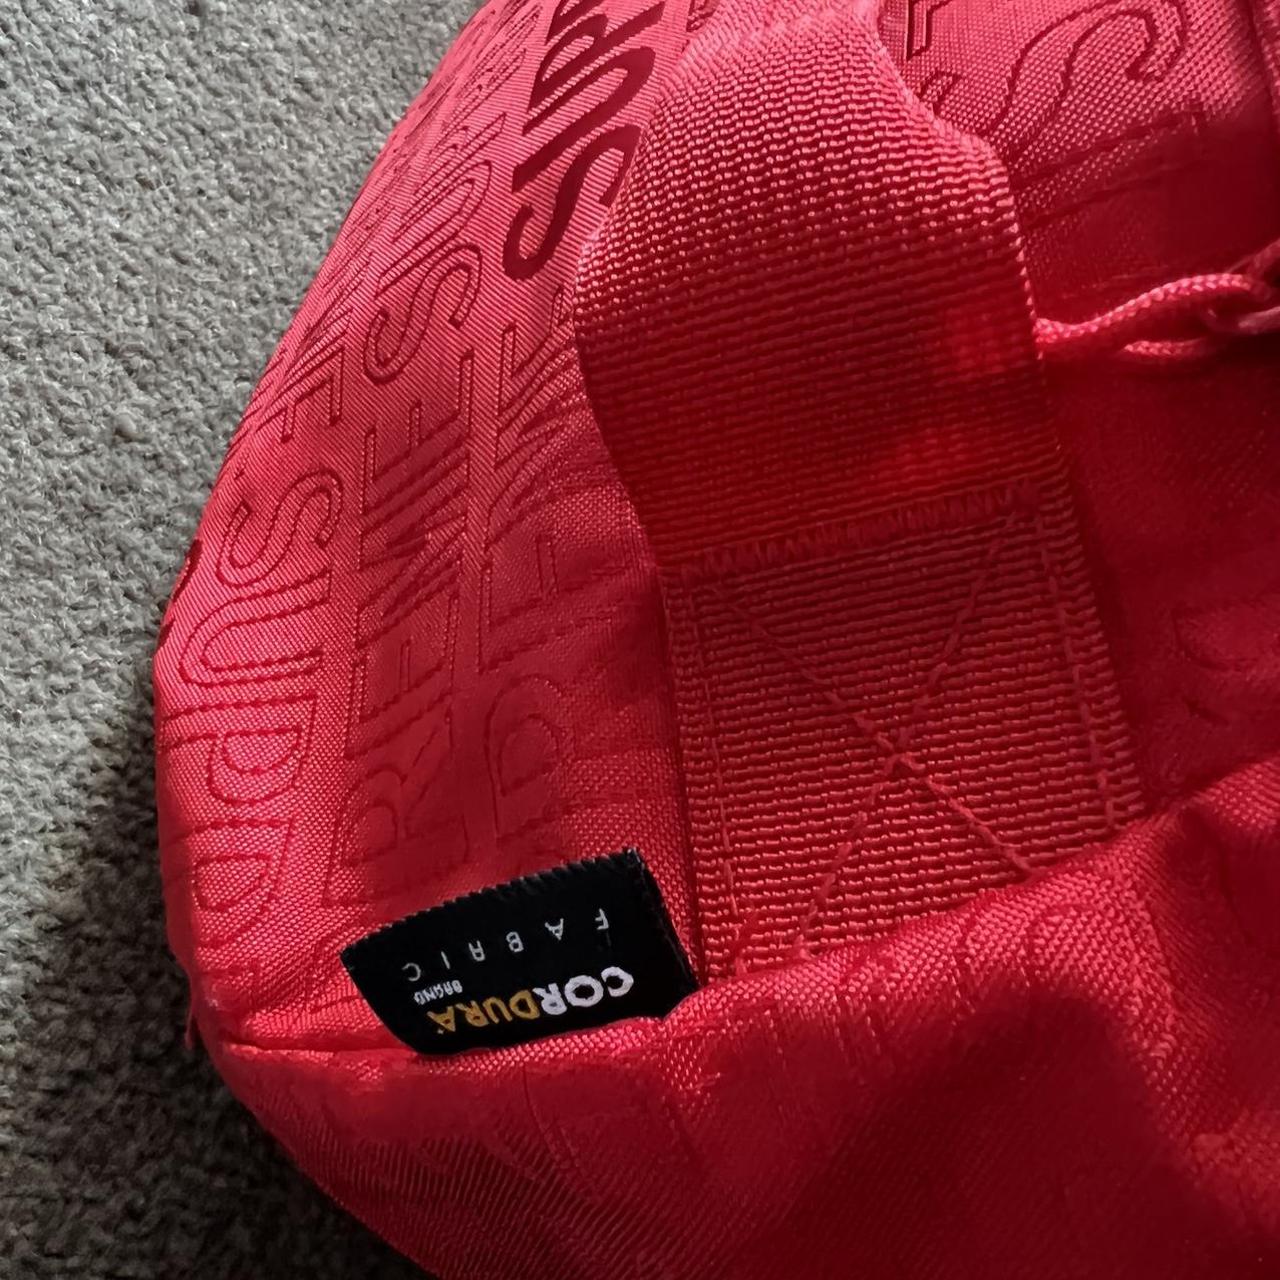 Supreme Duffle Bag Red SS19 - Buy and Sell – SOLE SERIOUSS